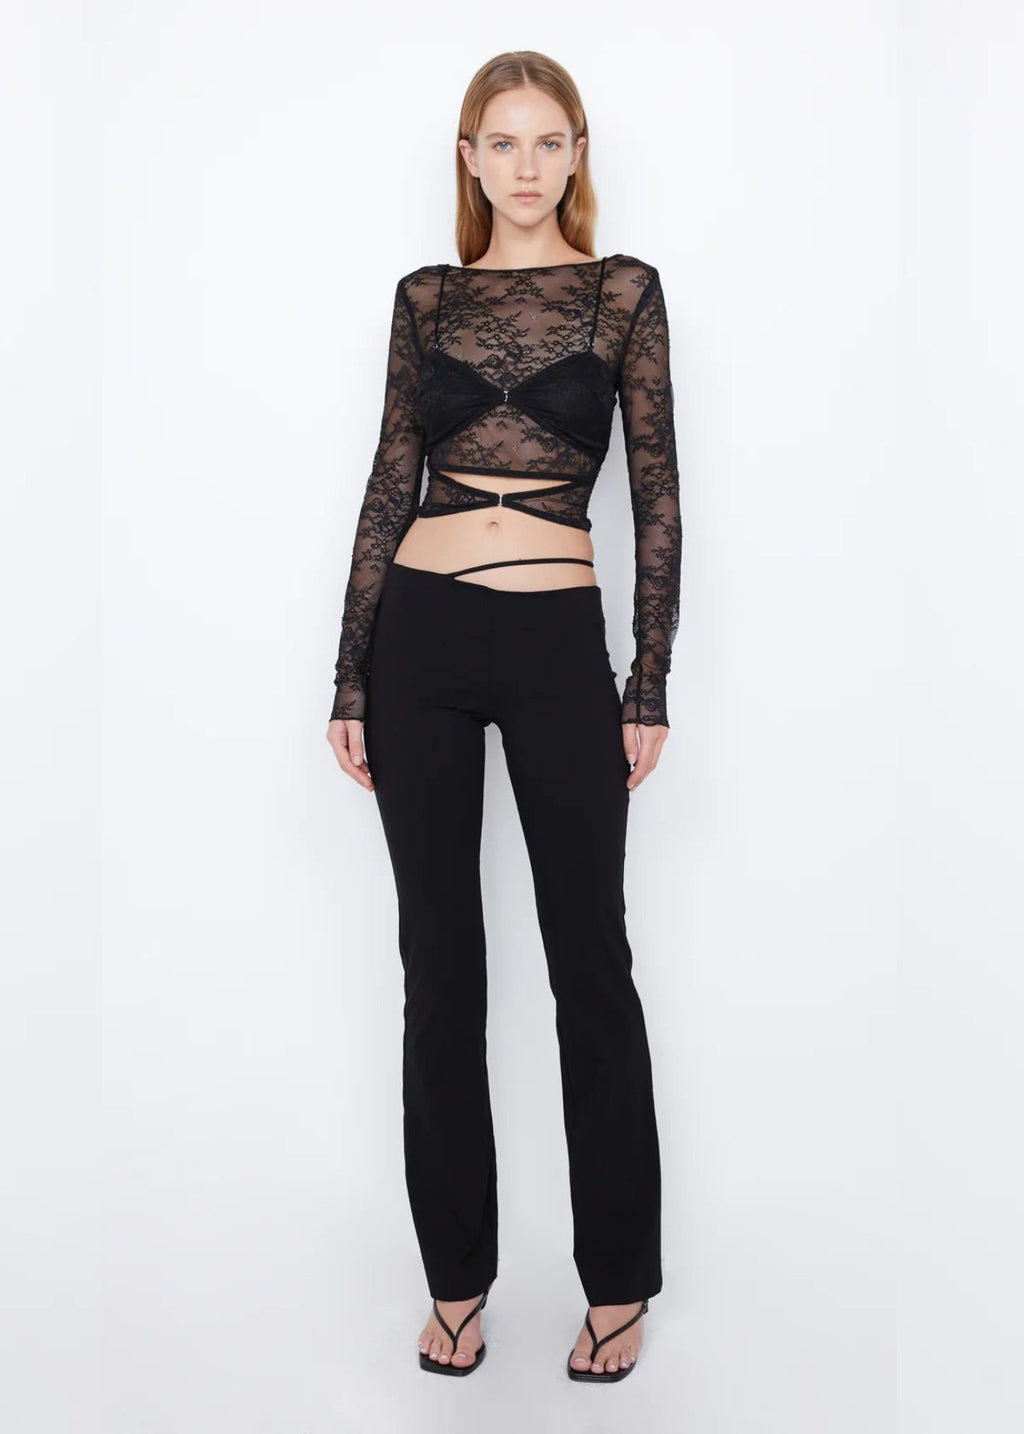 Amoras Long Sleeve Top in Black - Ché by Chelsey